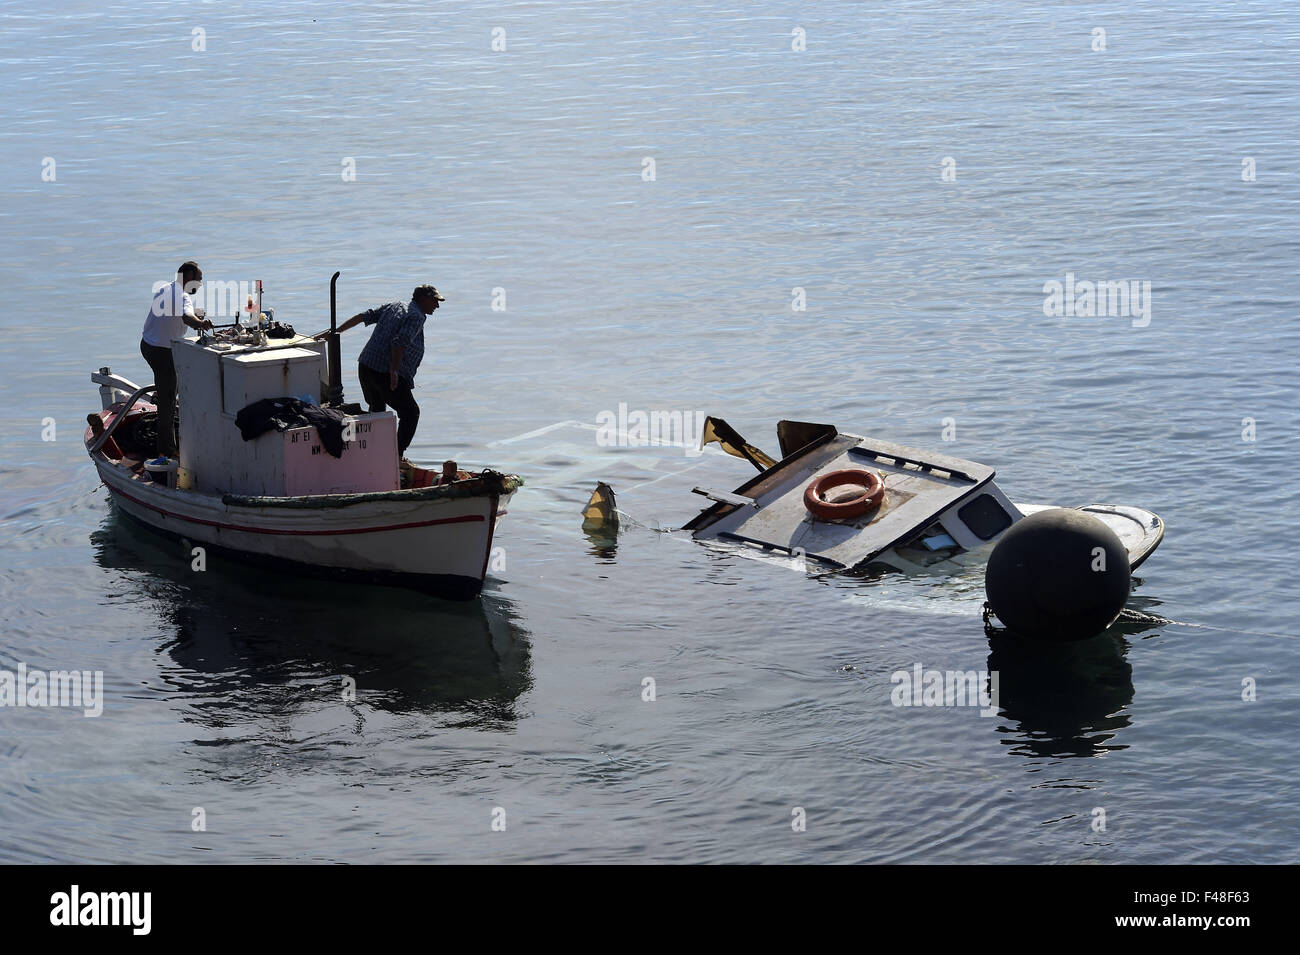 Lesbos isle, Greece. 15th Oct, 2015. Fatal boat accident at sea causes at least nine deaths among migrants. Thousands arrive every day on the shores of the island of Lesbos from neighboring Turkey, distance only 4 nautical miles. Dead bodies are pulled out of the sea after Greek coastguard vessel hits migrant boat. Credit:  Danilo Balducci/ZUMA Wire/Alamy Live News Stock Photo